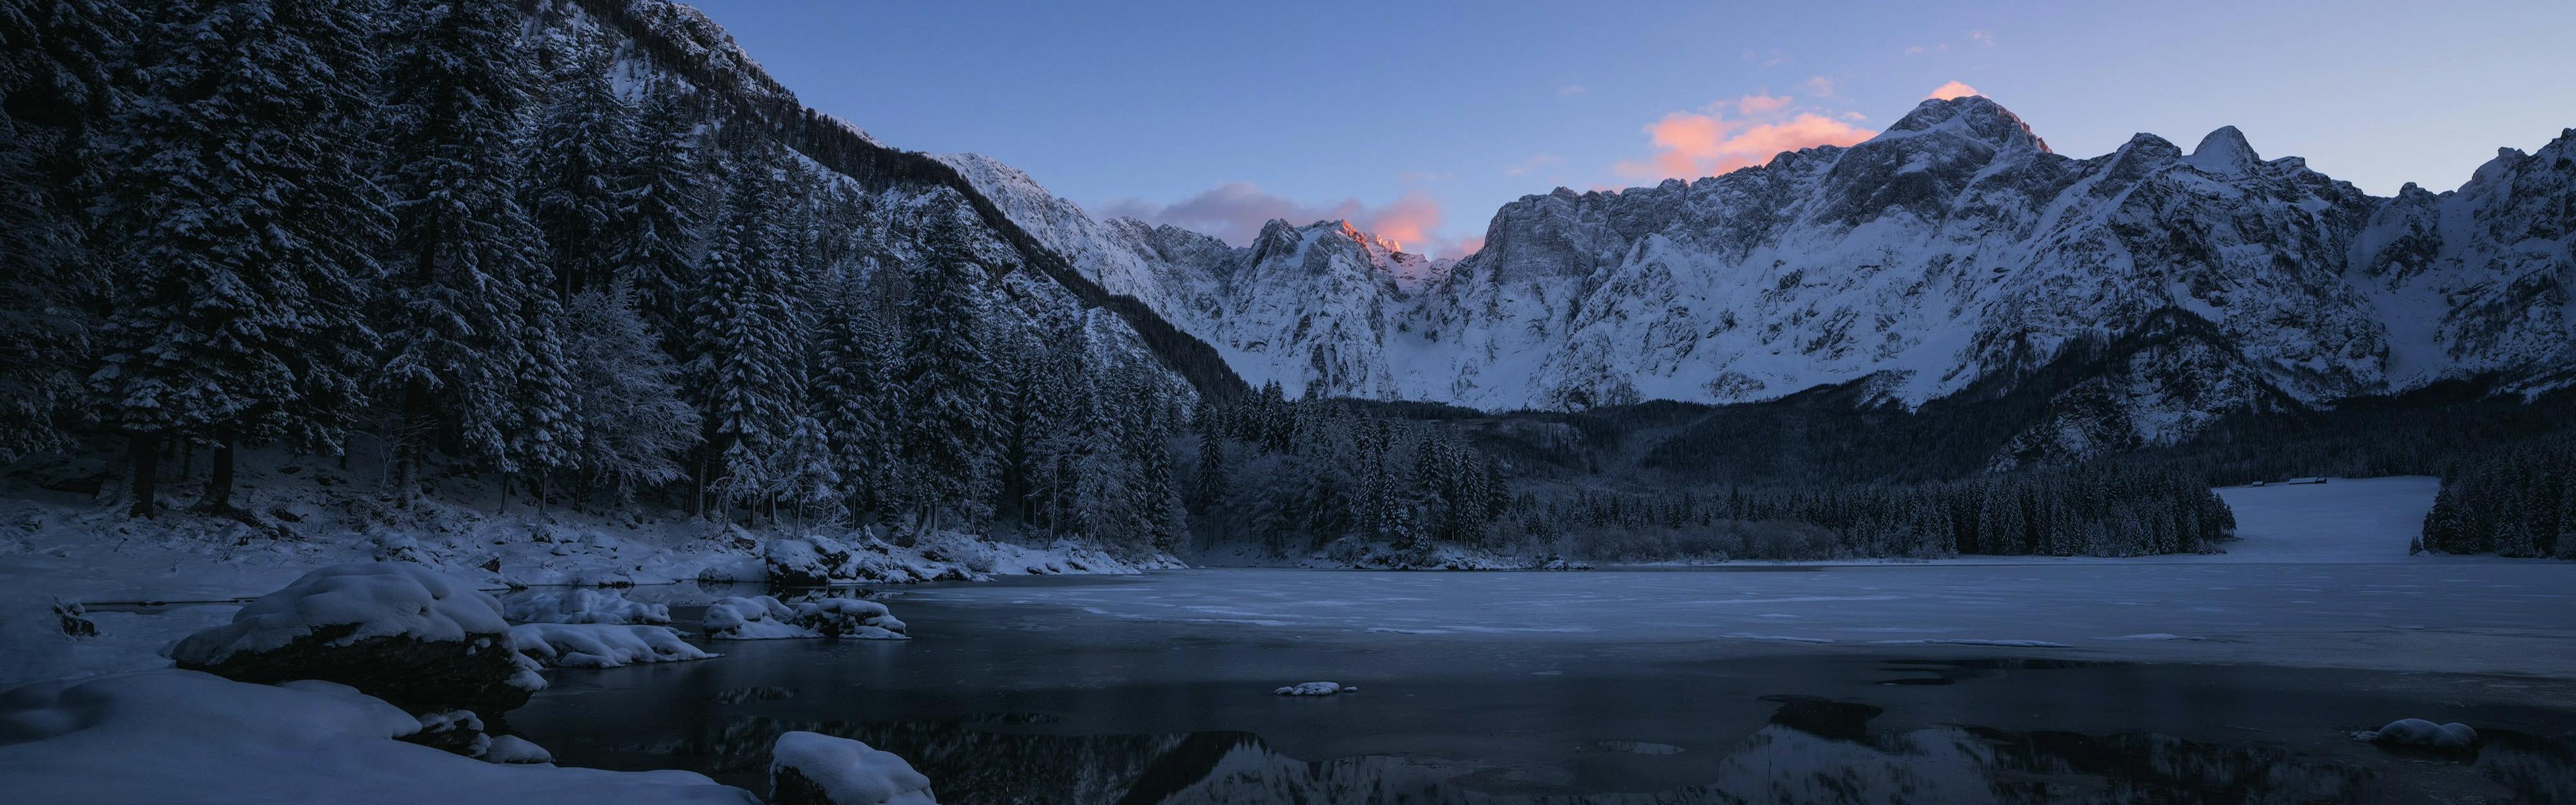 A sun rises over a snowy mountain and lake. 